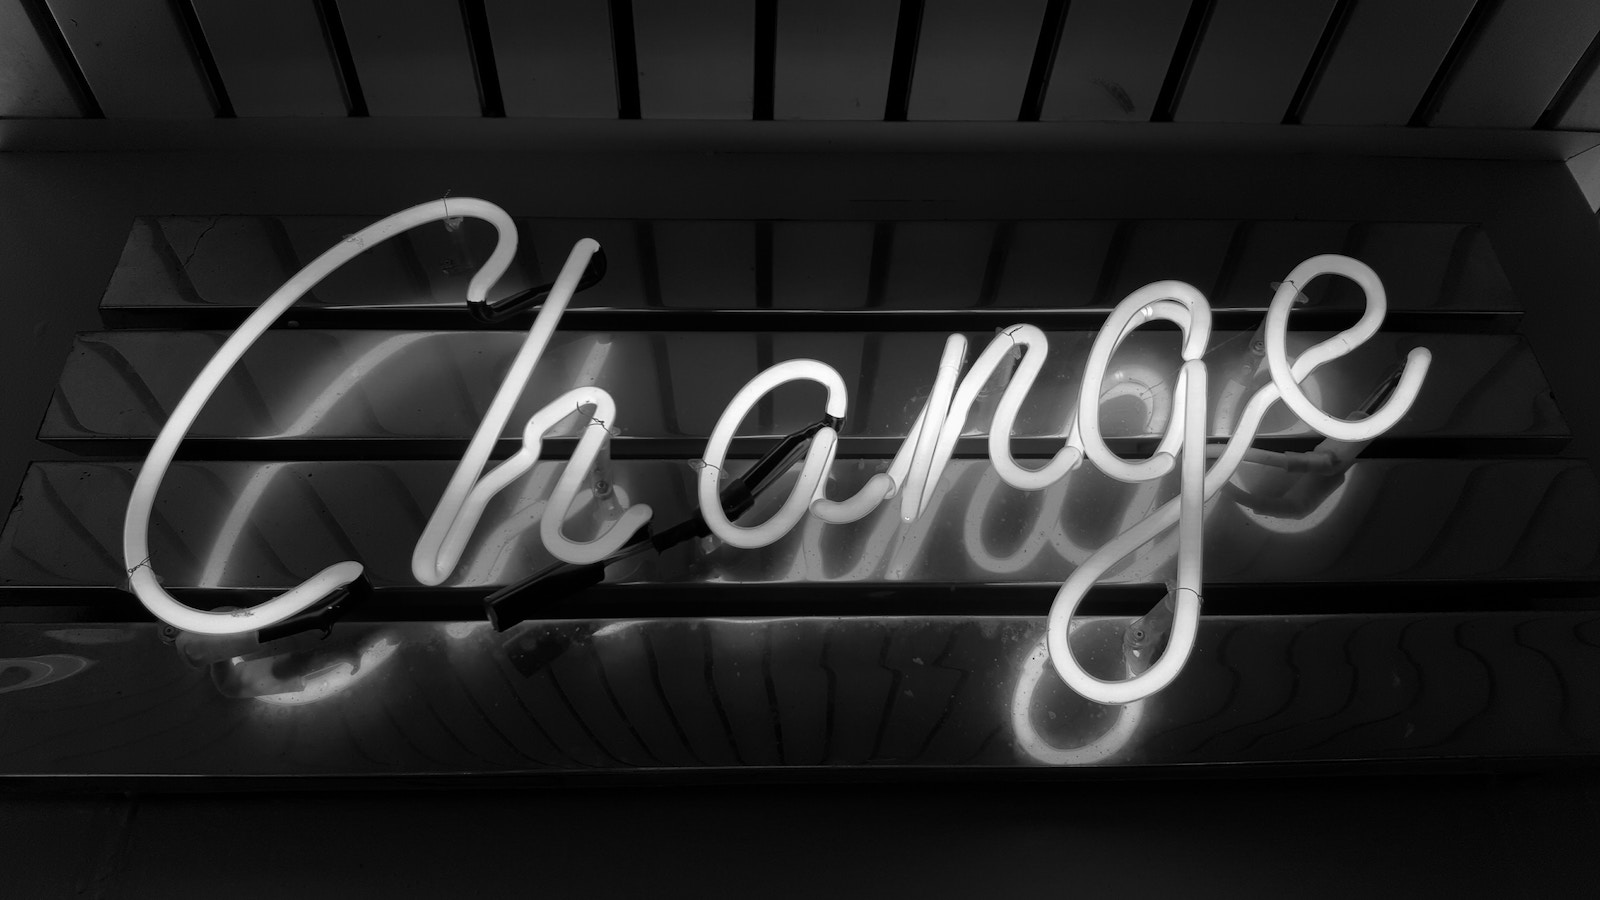 A neon sign saying, "Change" in cursive lettering.